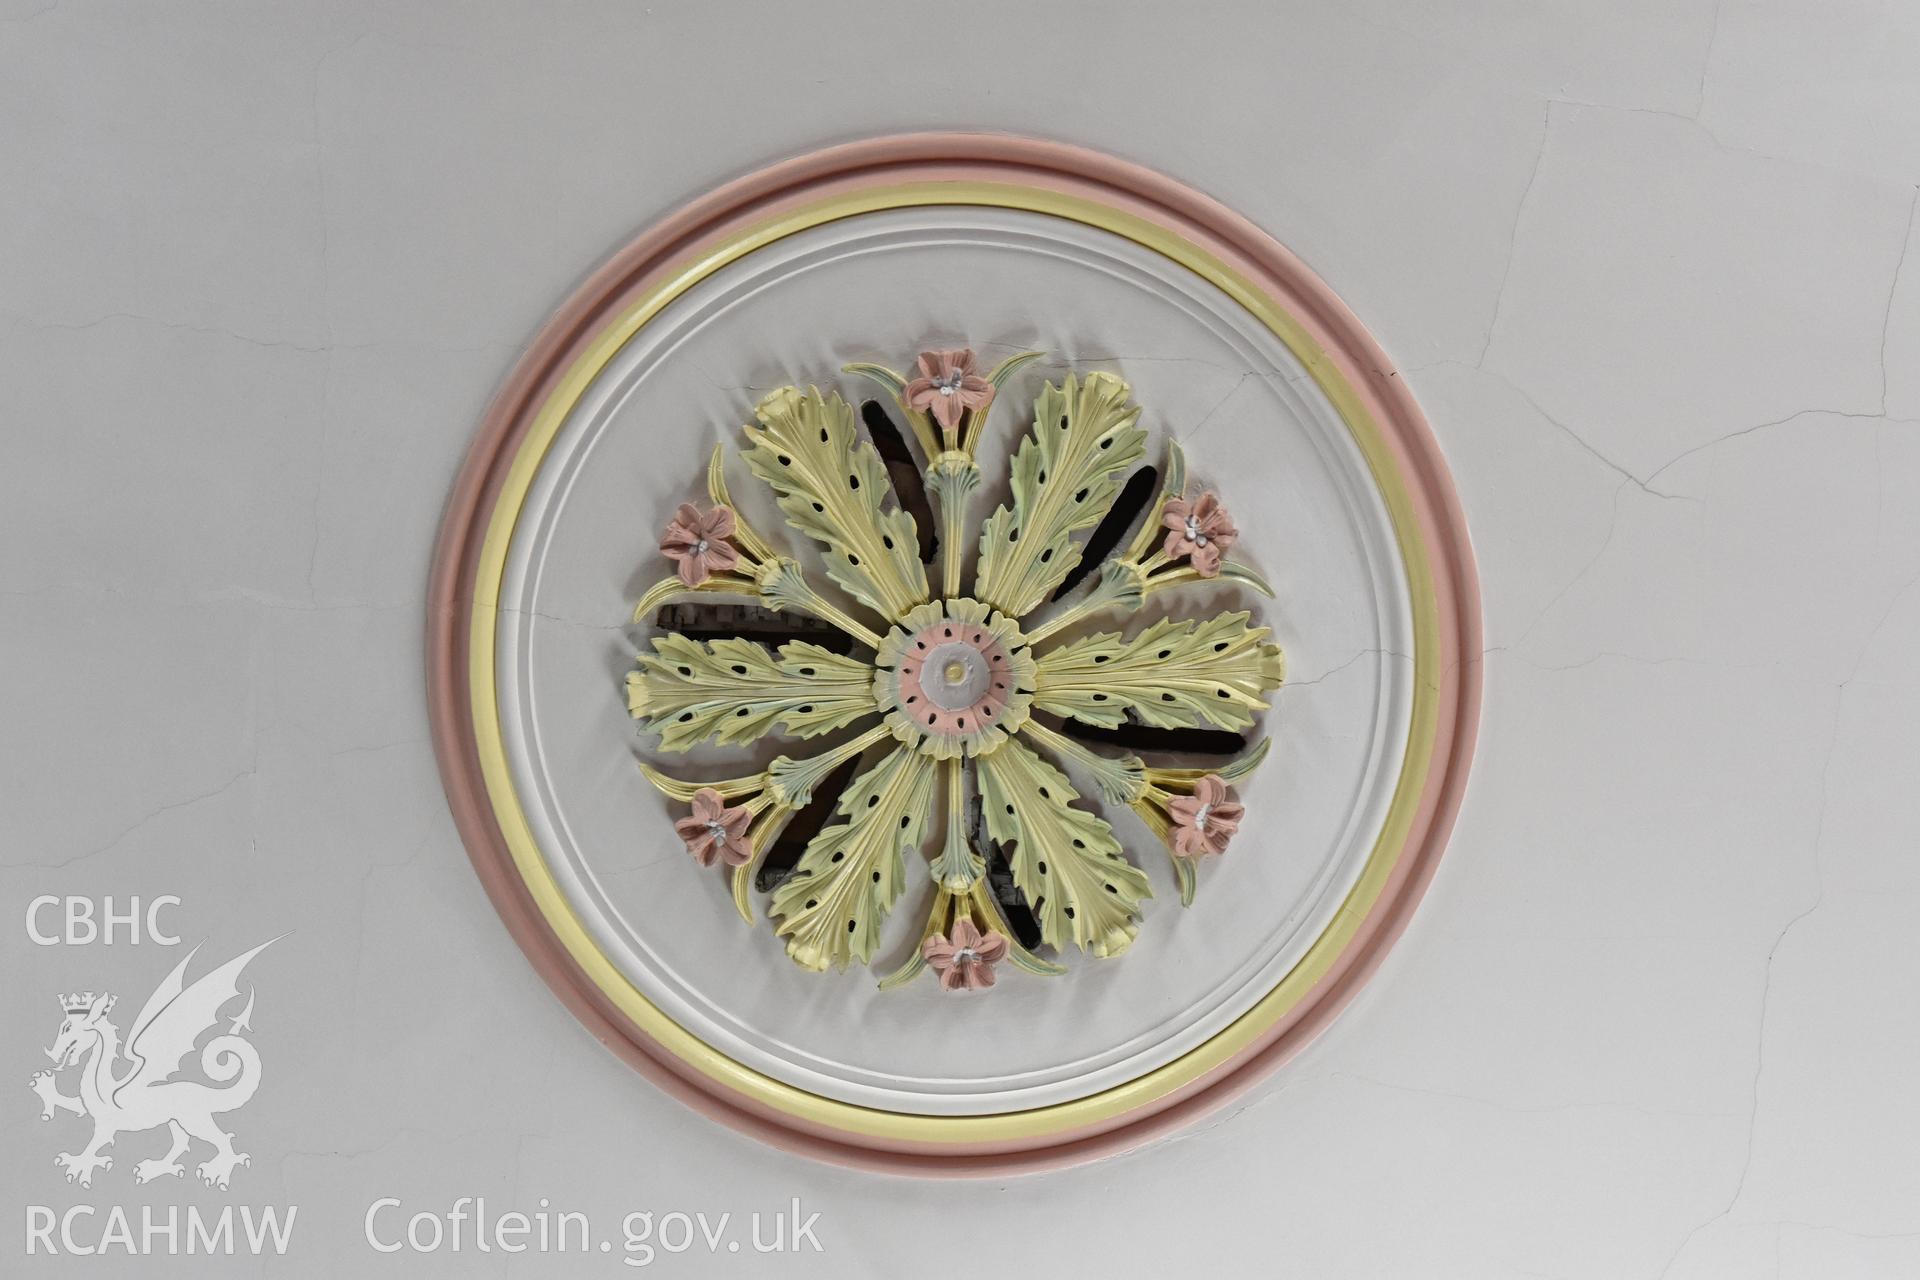 Colour photograph showing detail of ceiling decoration at the Baptist & Unitarian Chapel, Nottage, Porthcawl. Taken during photographic survey conducted by Sue Fielding on 12th May 2018.